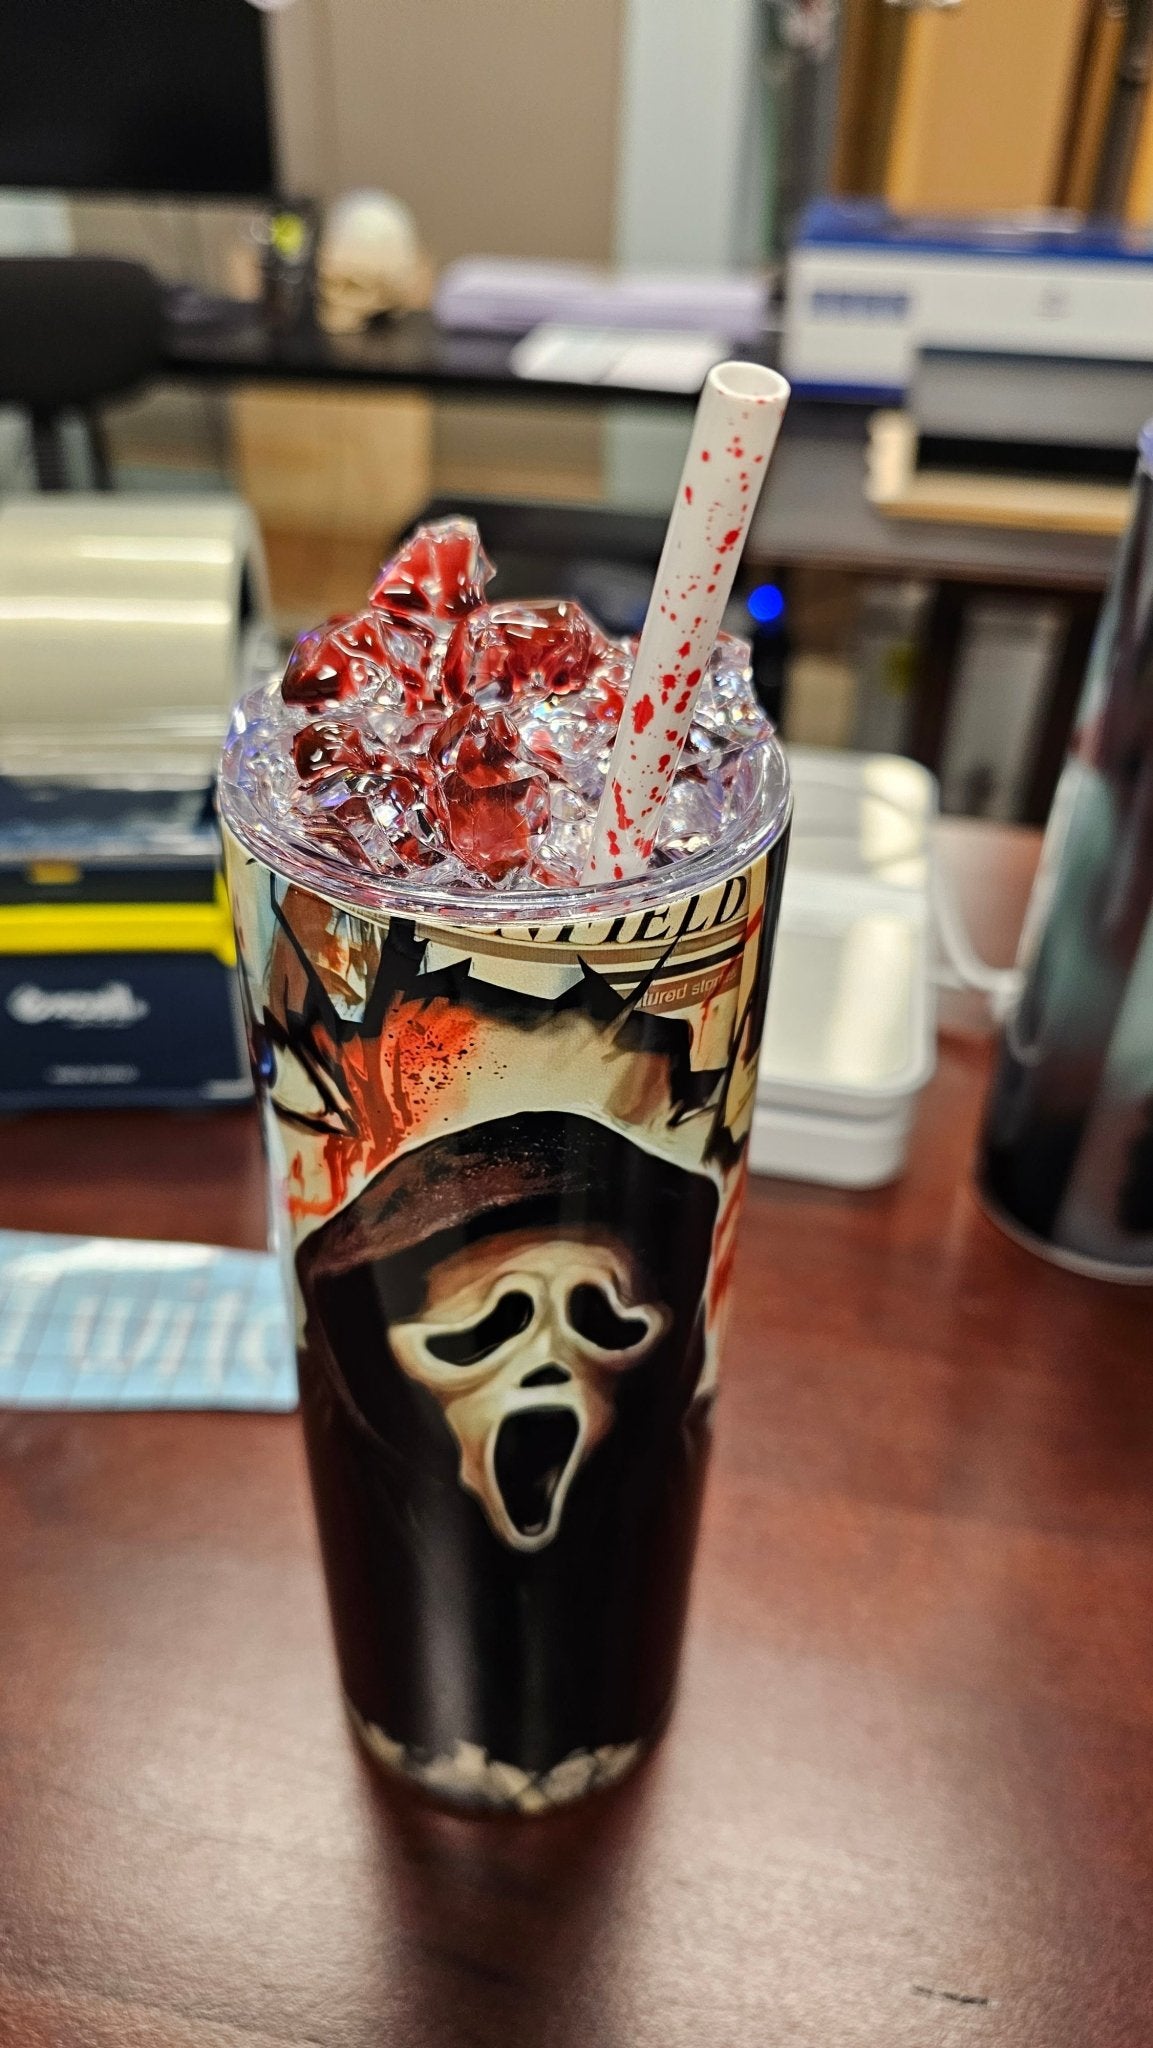 Bloodied scream filled tumbler